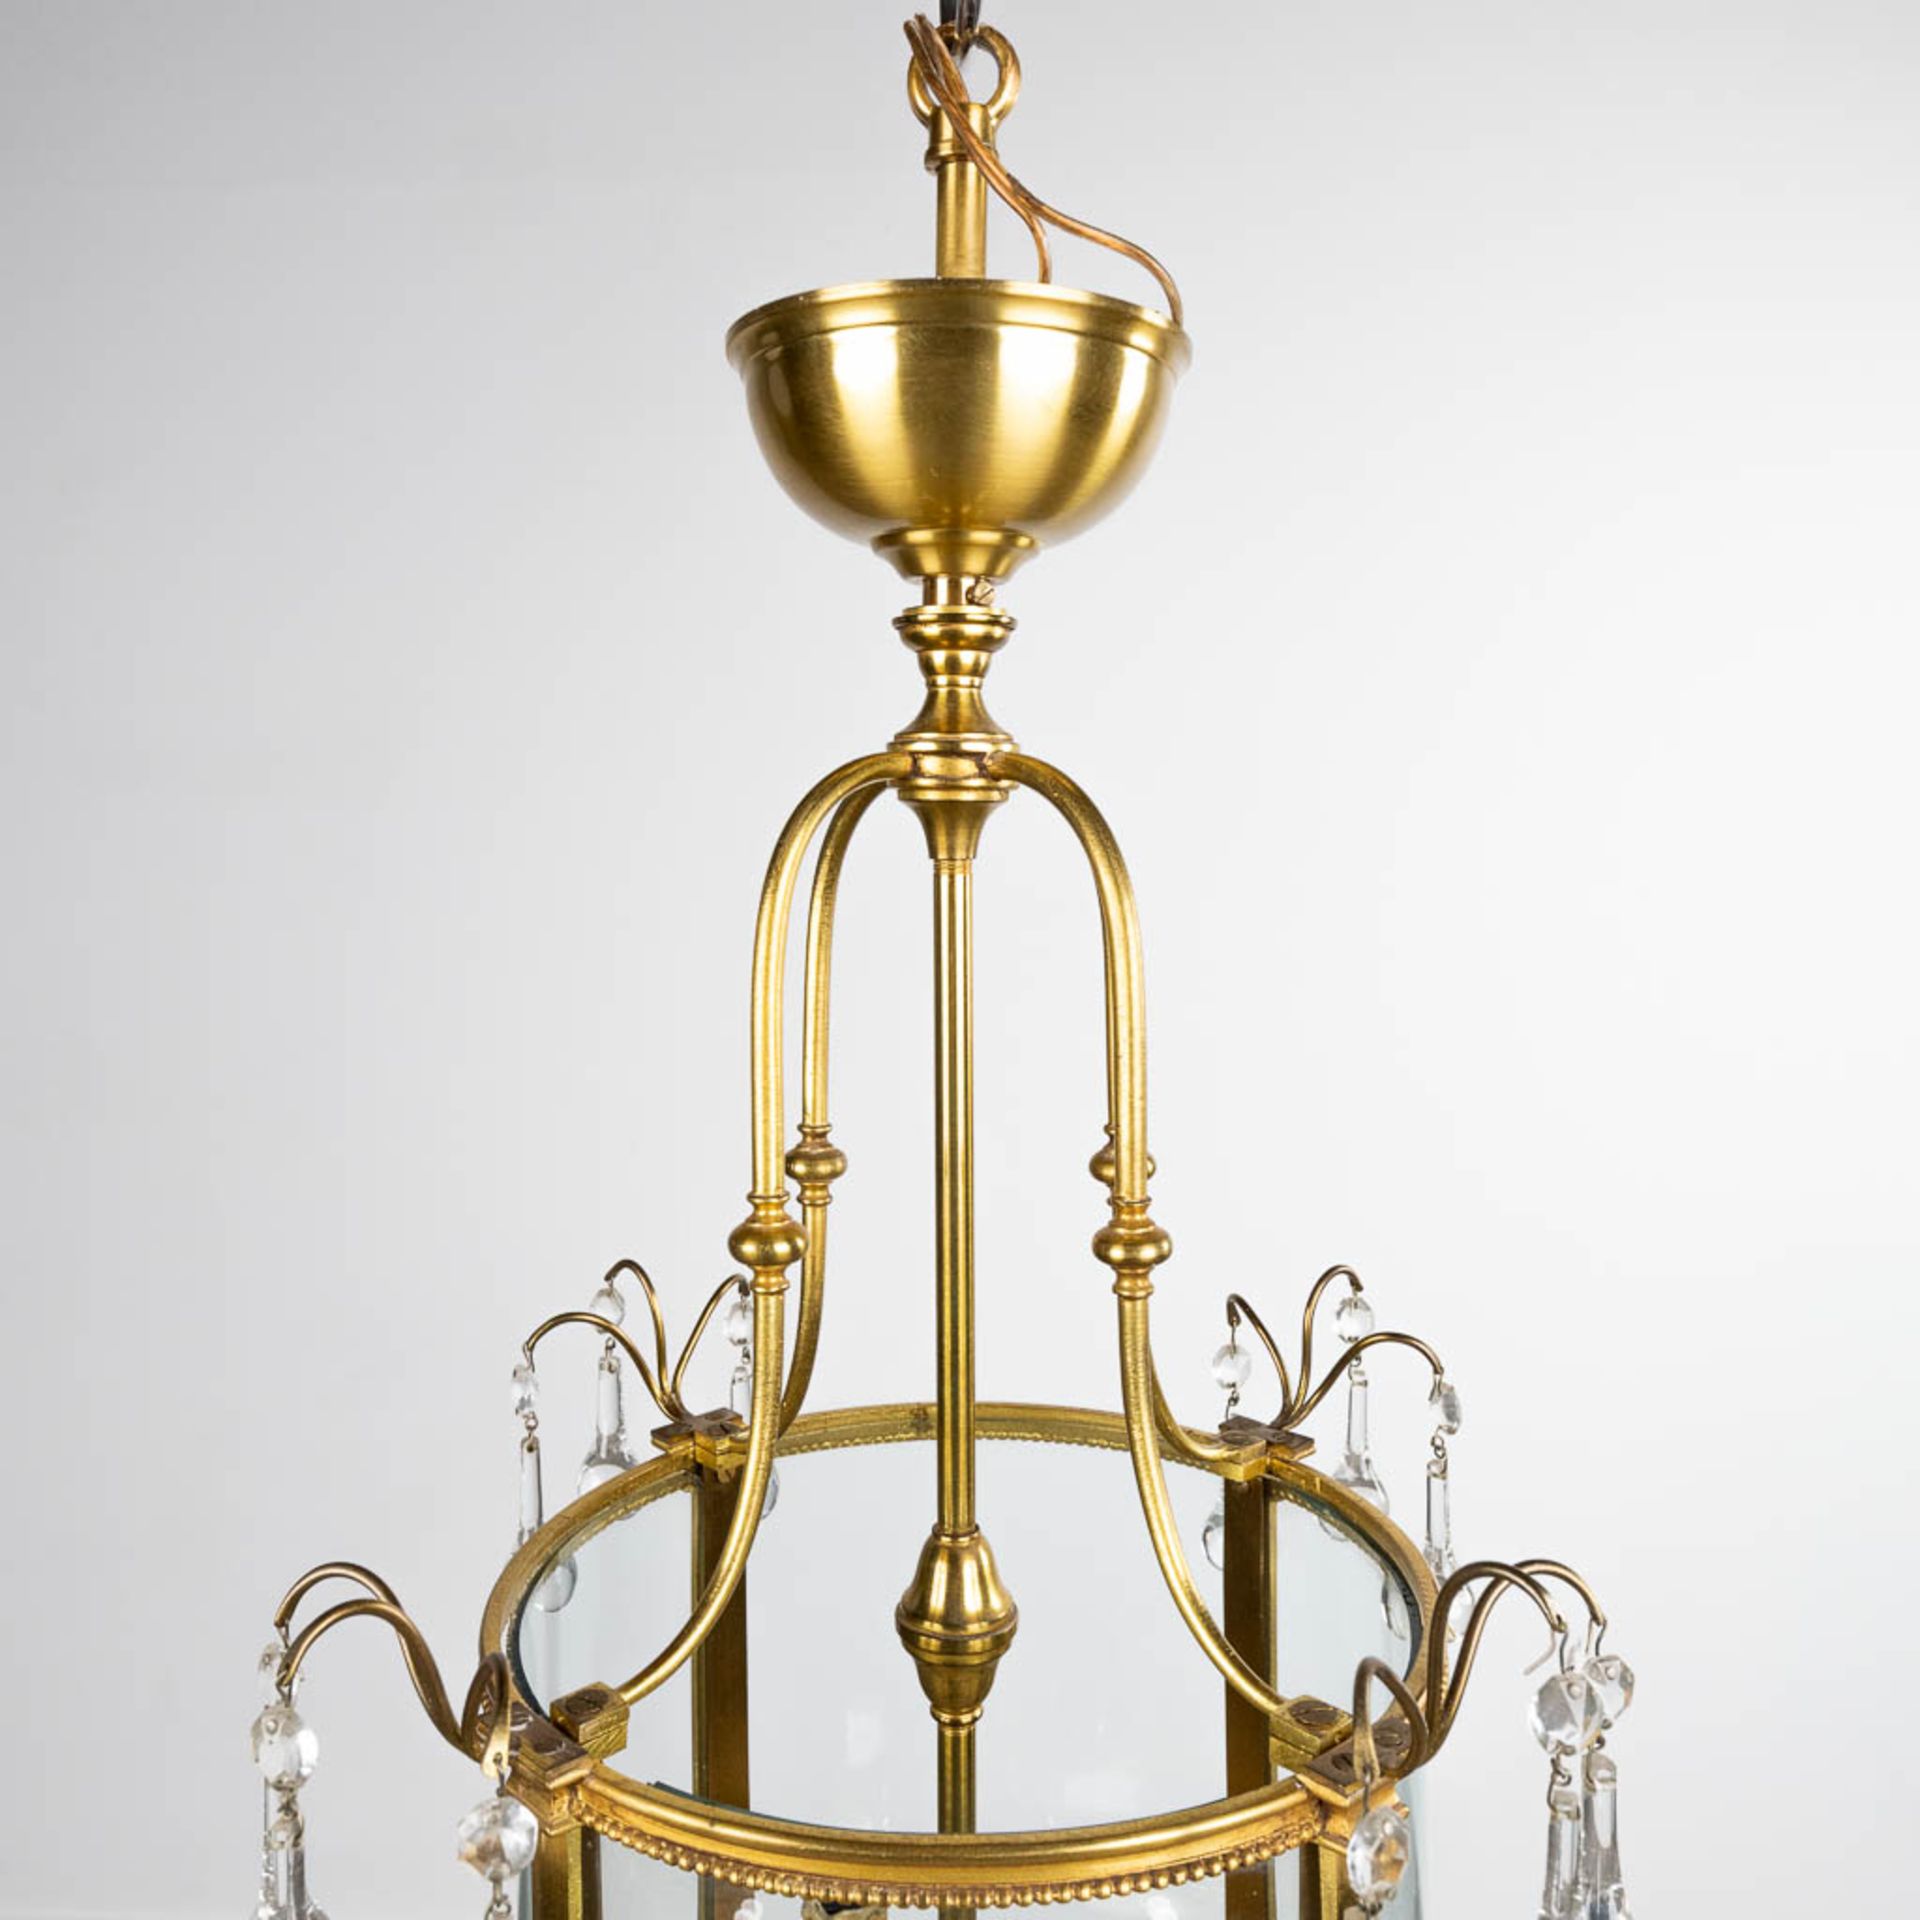 A hall lamp made of brass and glass. Circa 1970. (H: 67 x D: 36 cm) - Image 5 of 9